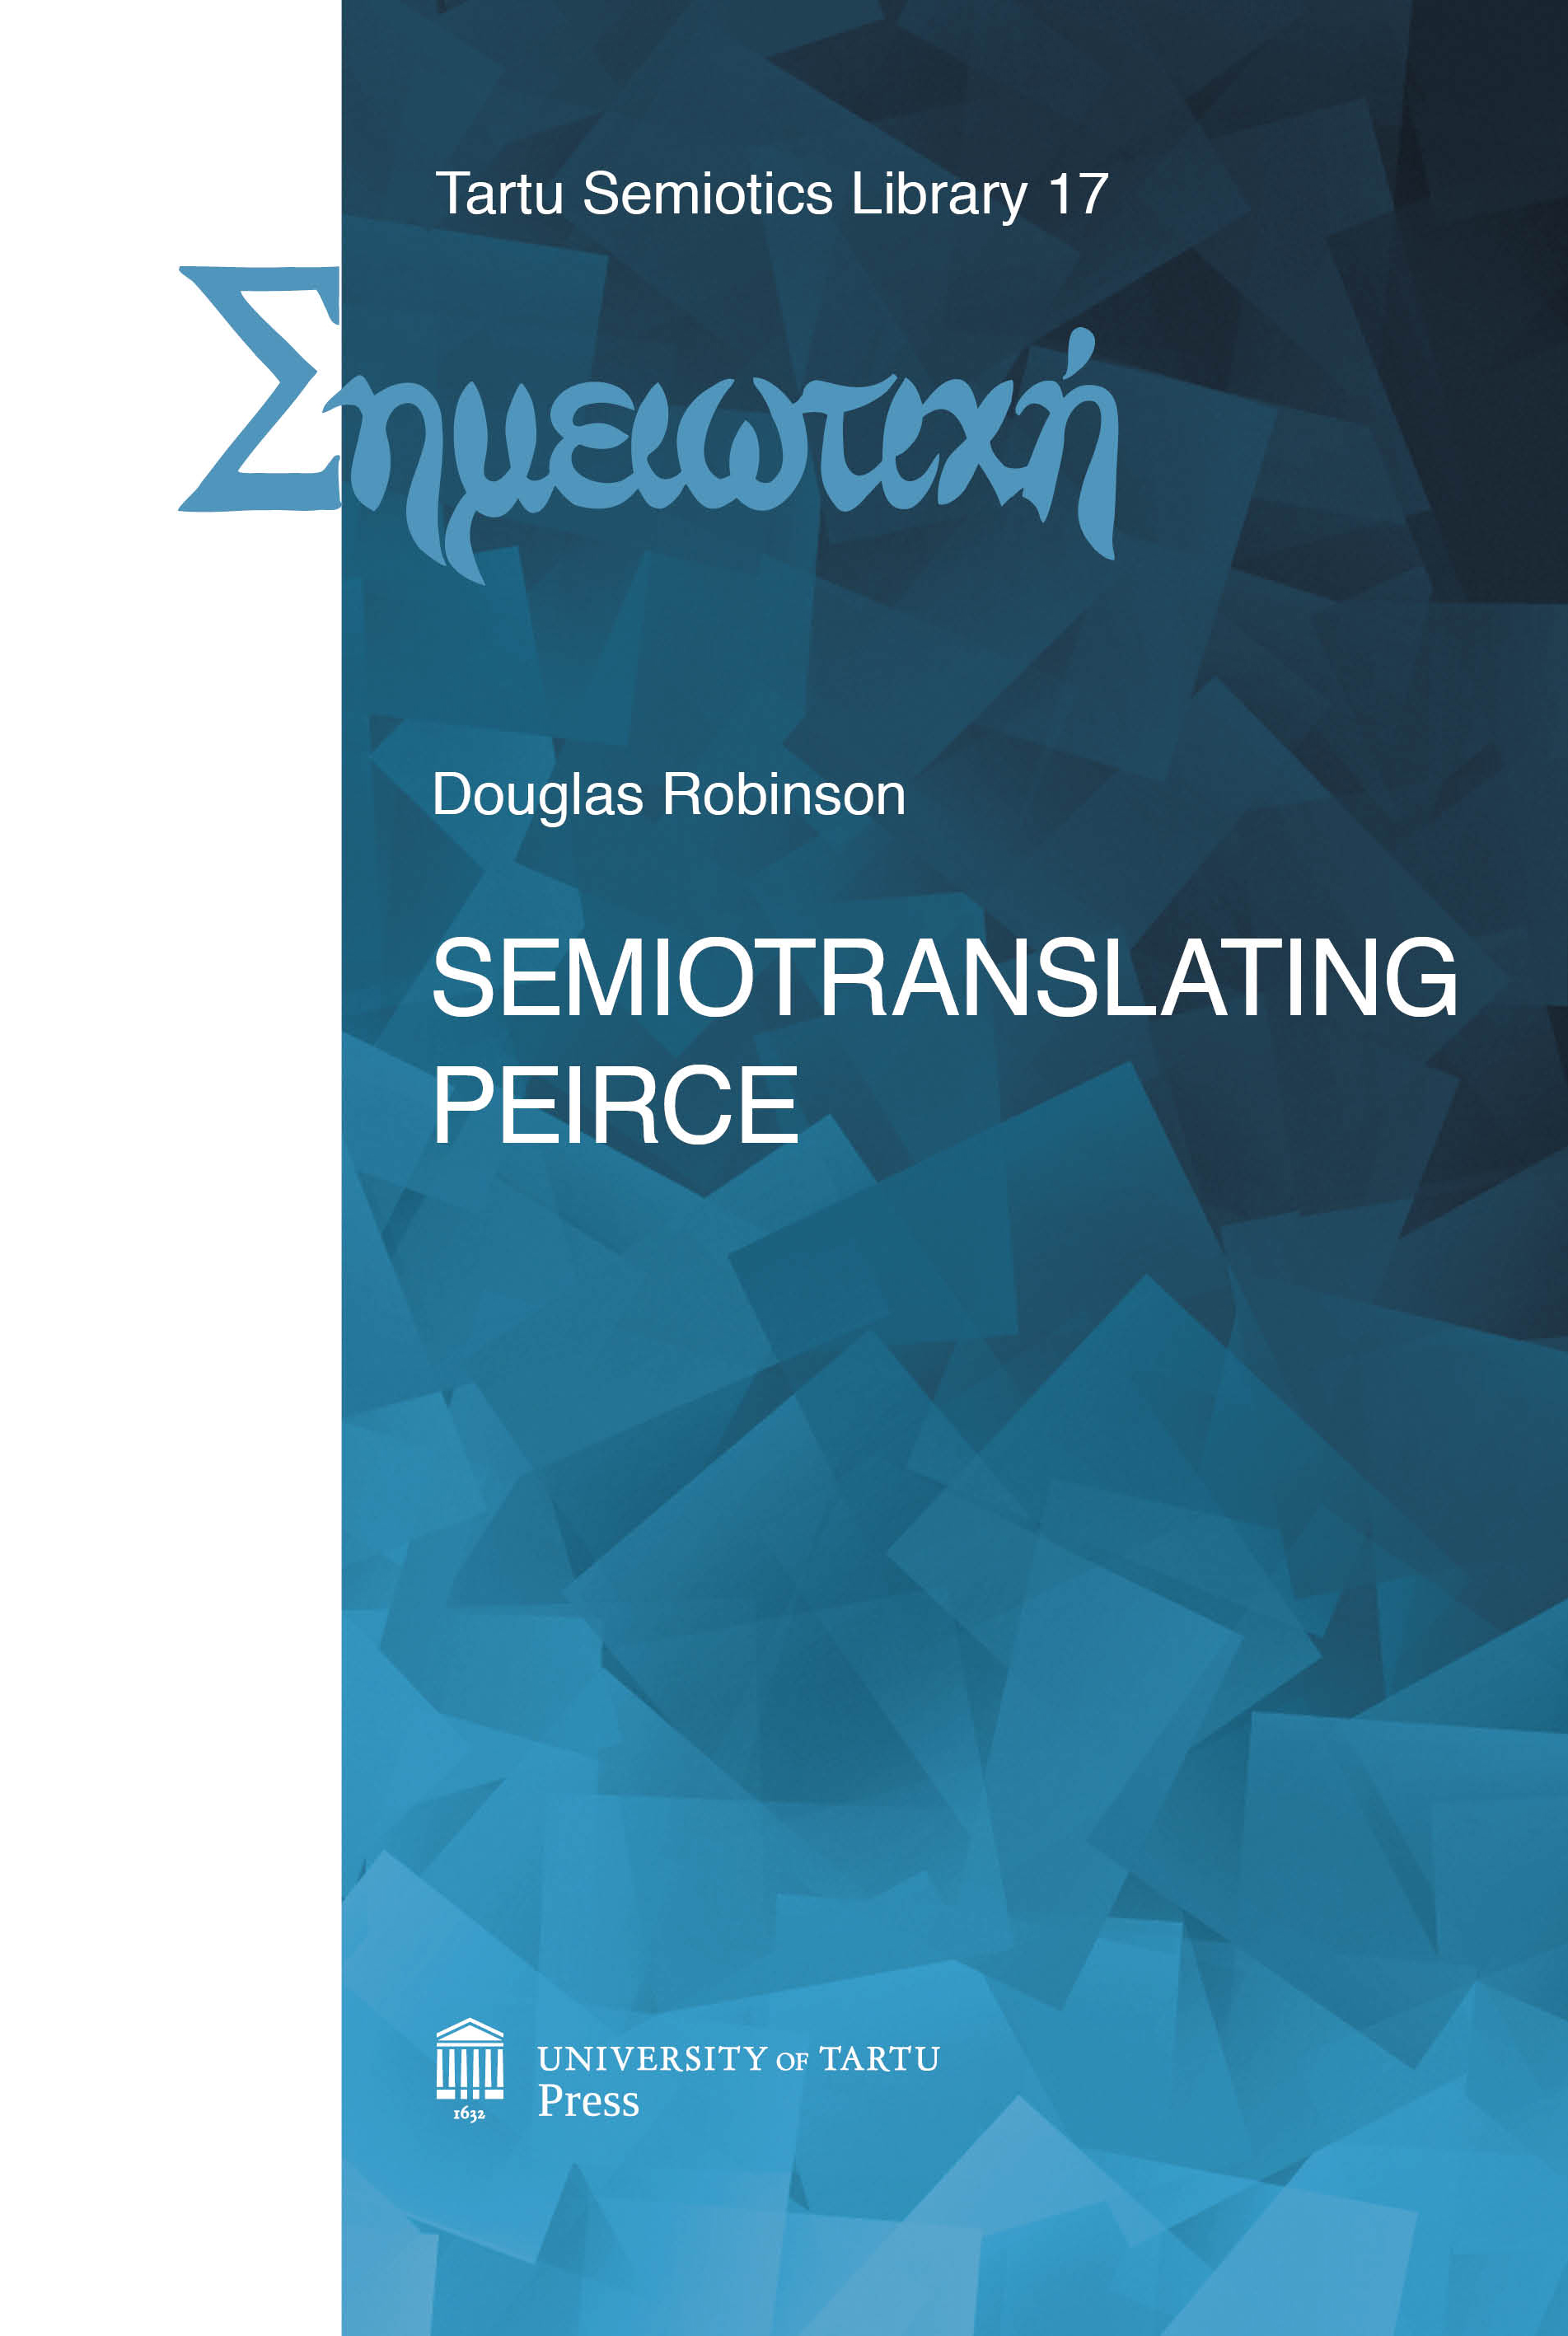 Chapter 2. - Test case 1: Semiotranslating Peirce into Finnish Cover Image